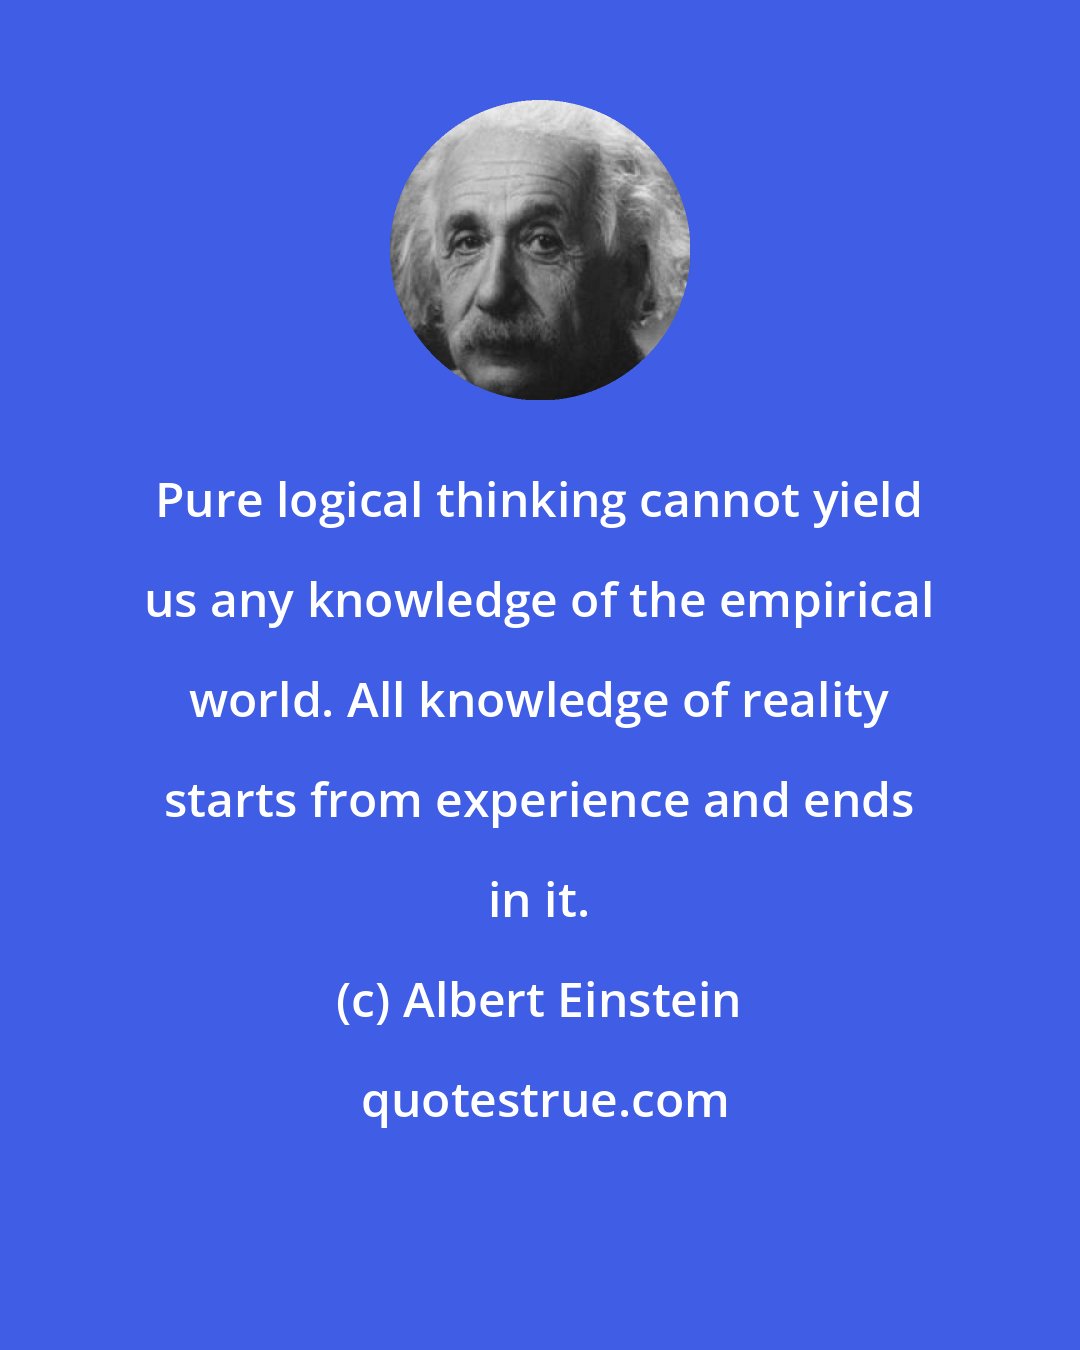 Albert Einstein: Pure logical thinking cannot yield us any knowledge of the empirical world. All knowledge of reality starts from experience and ends in it.